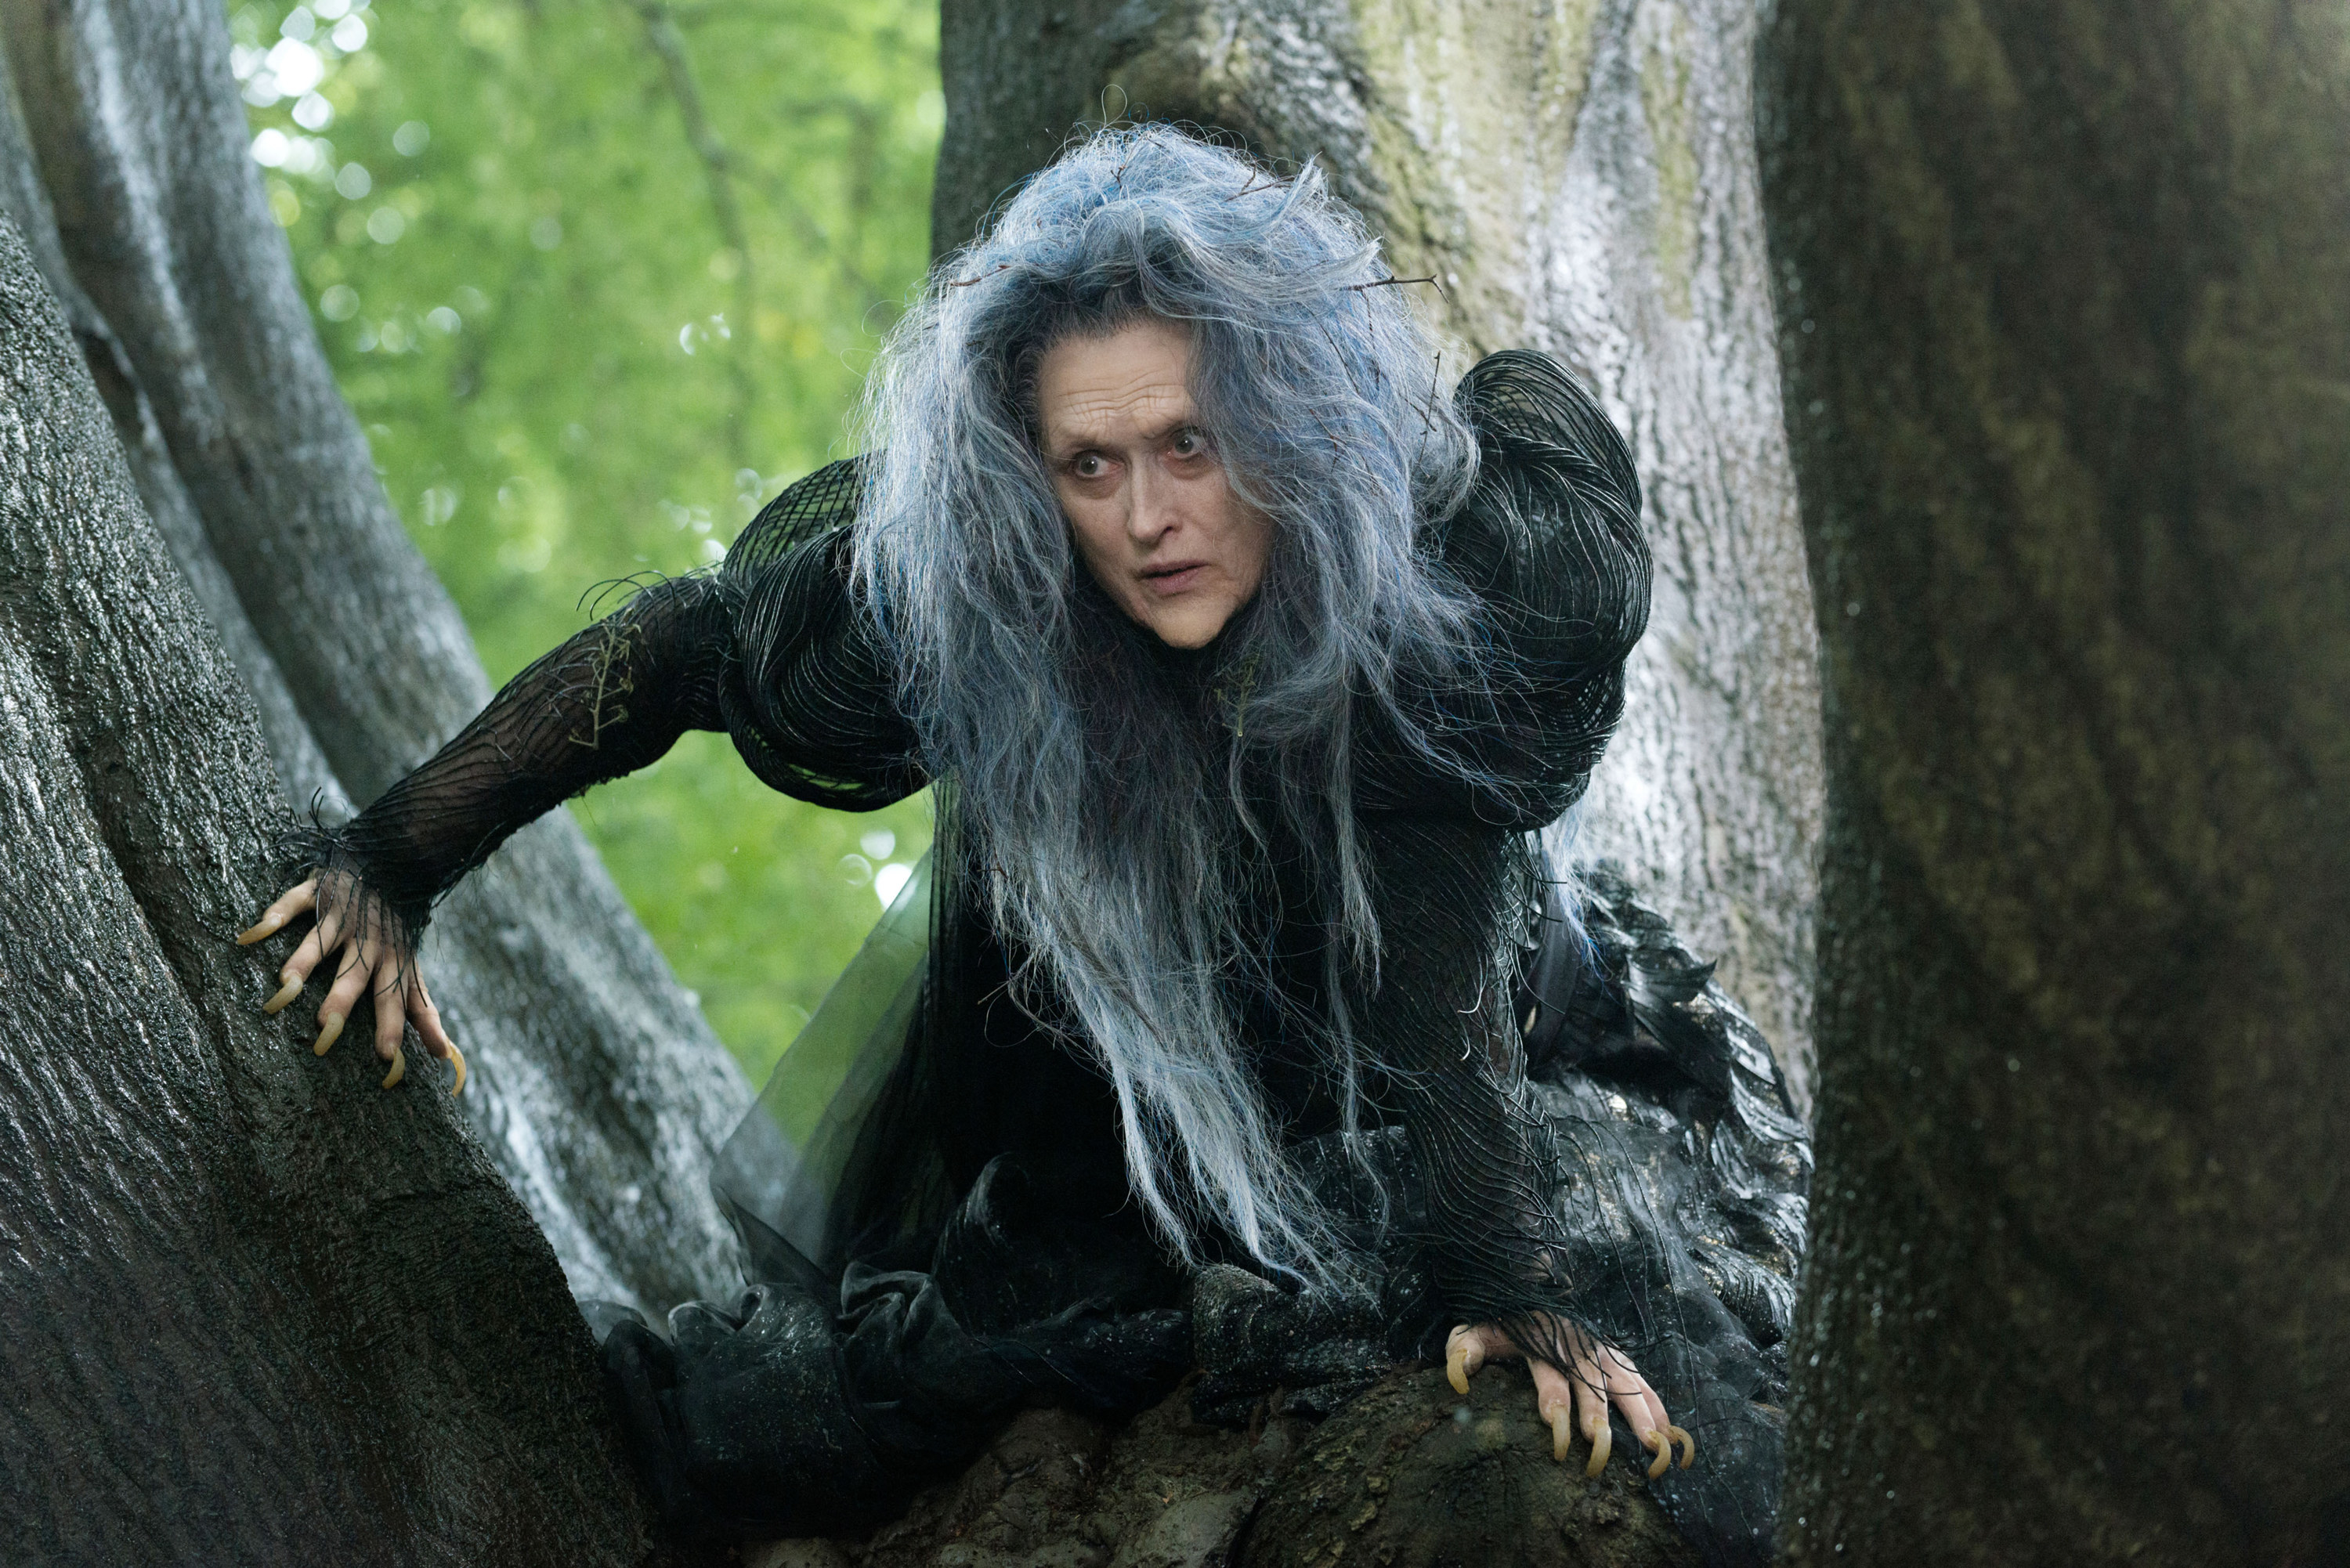 Meryl Streep as The Witch in Into The Woods.